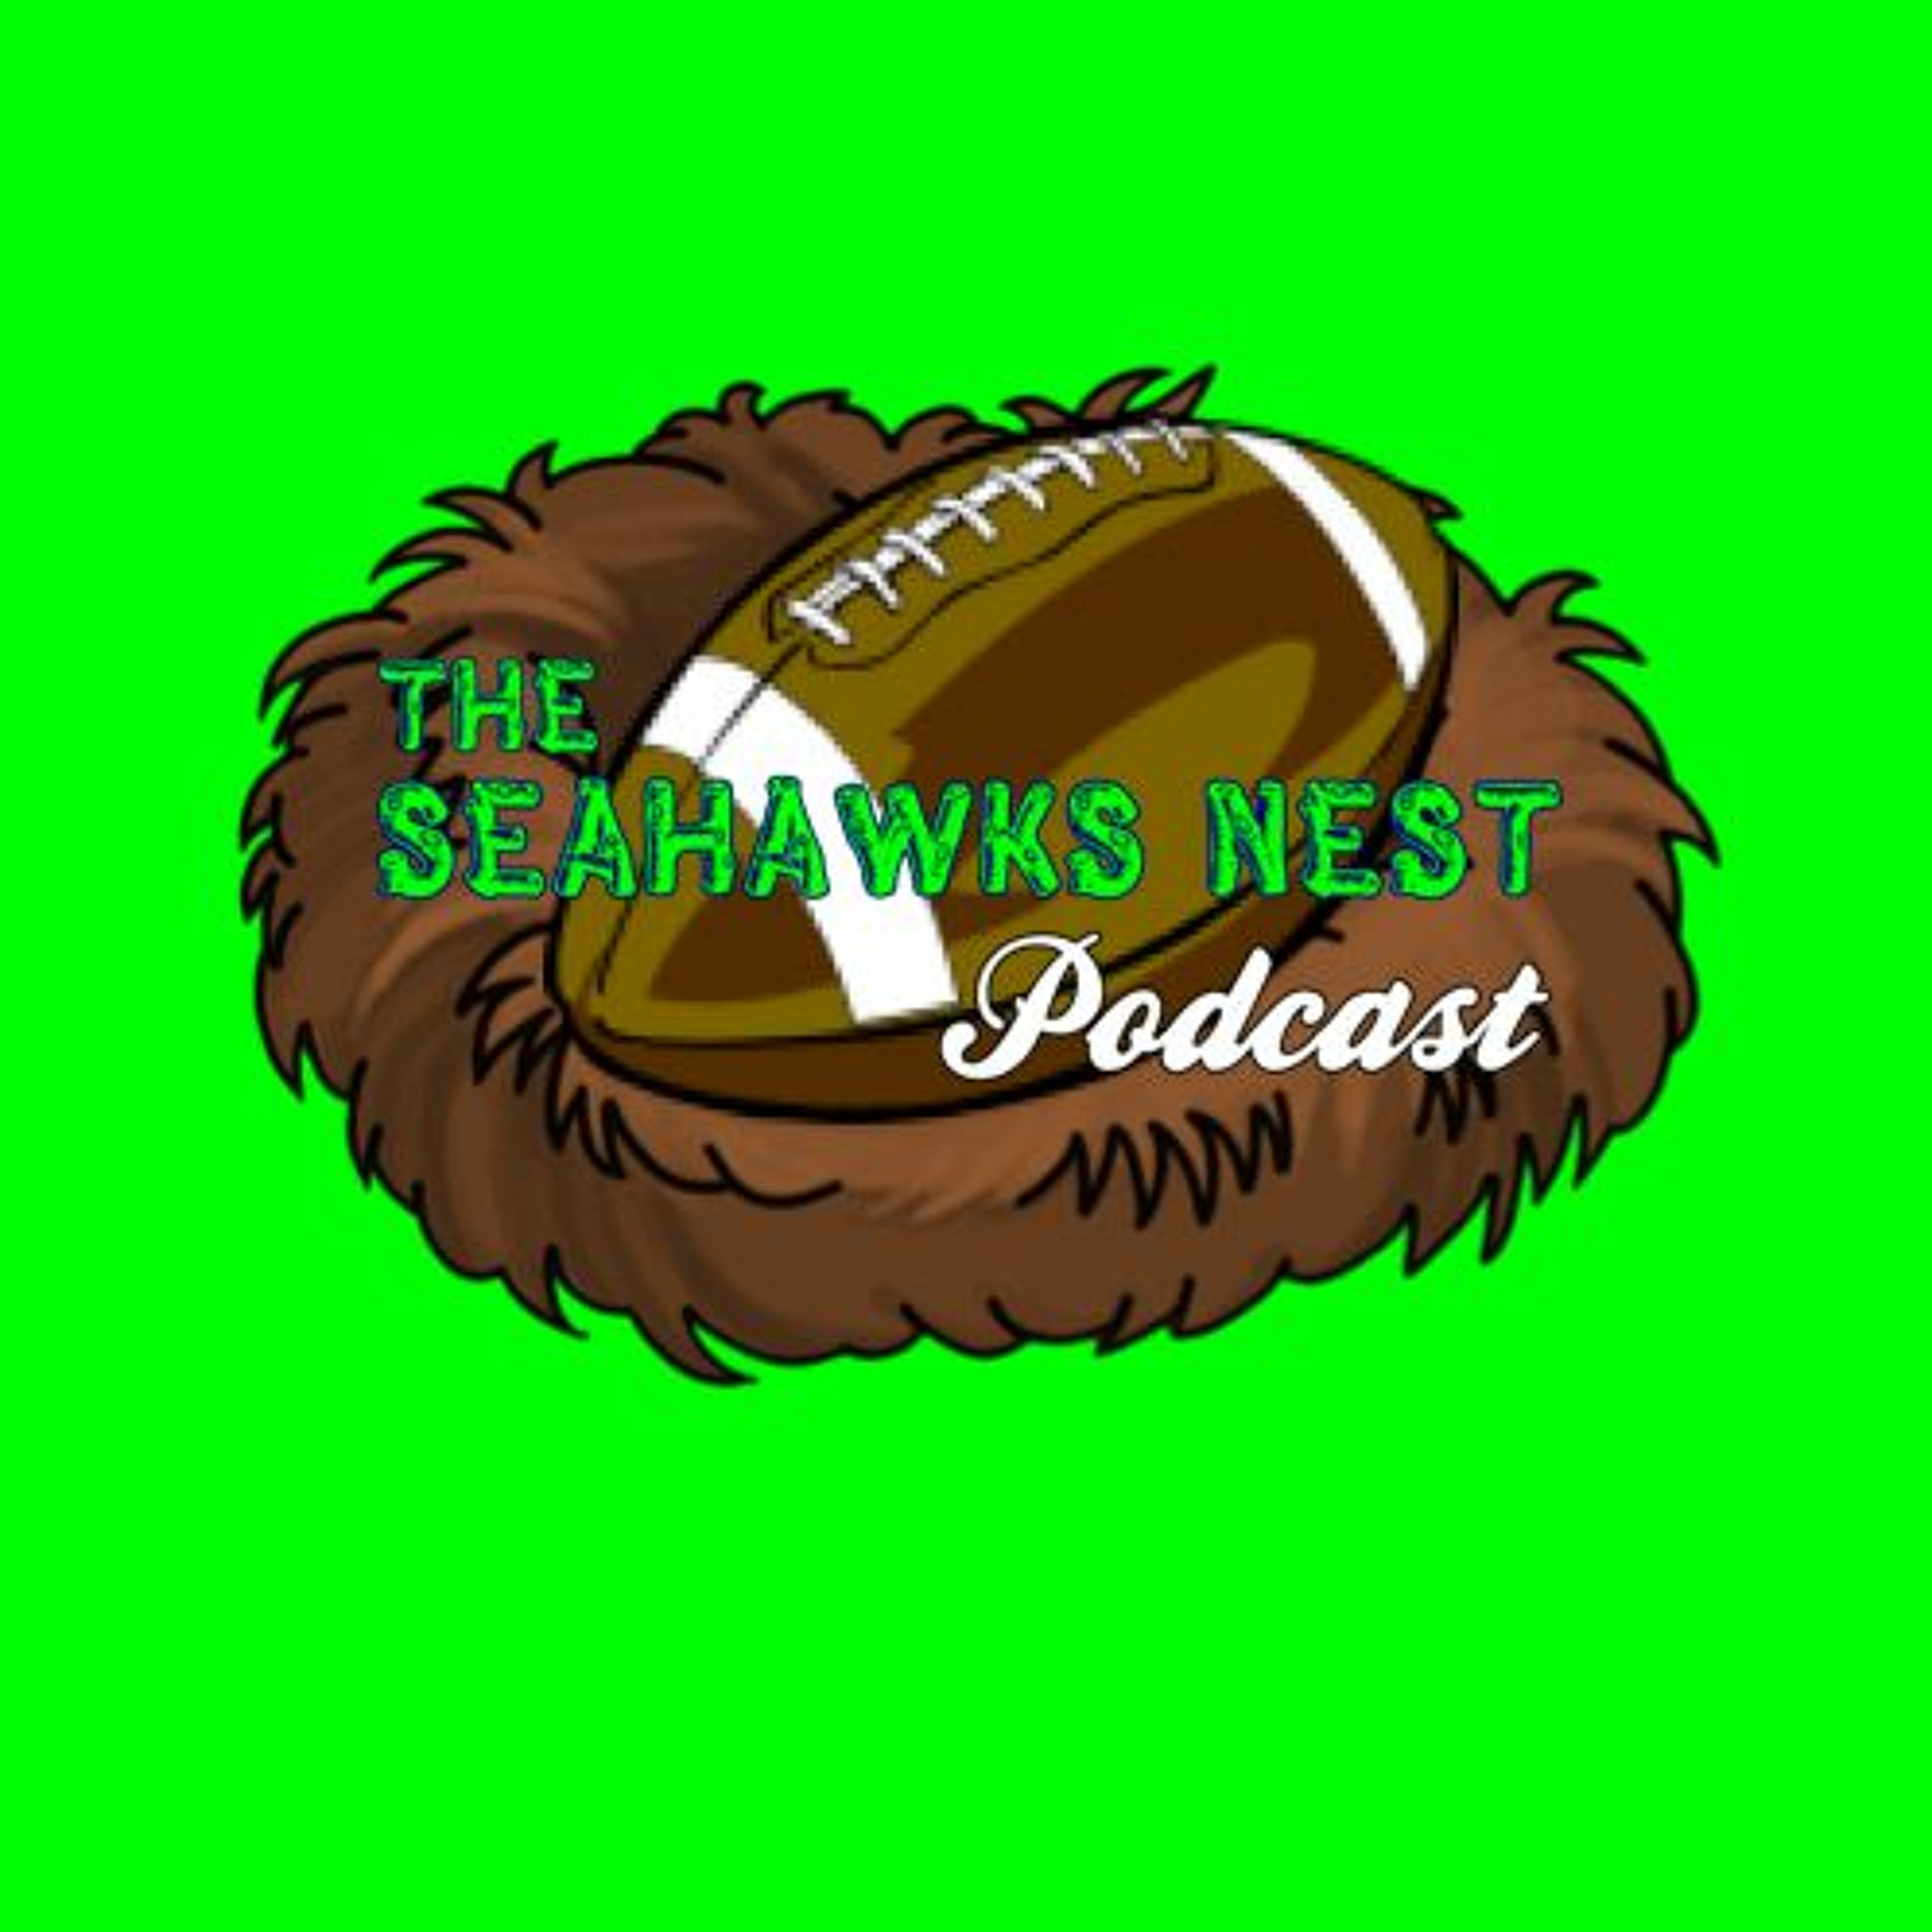 Episode 413 - Seahawks at Cowboys